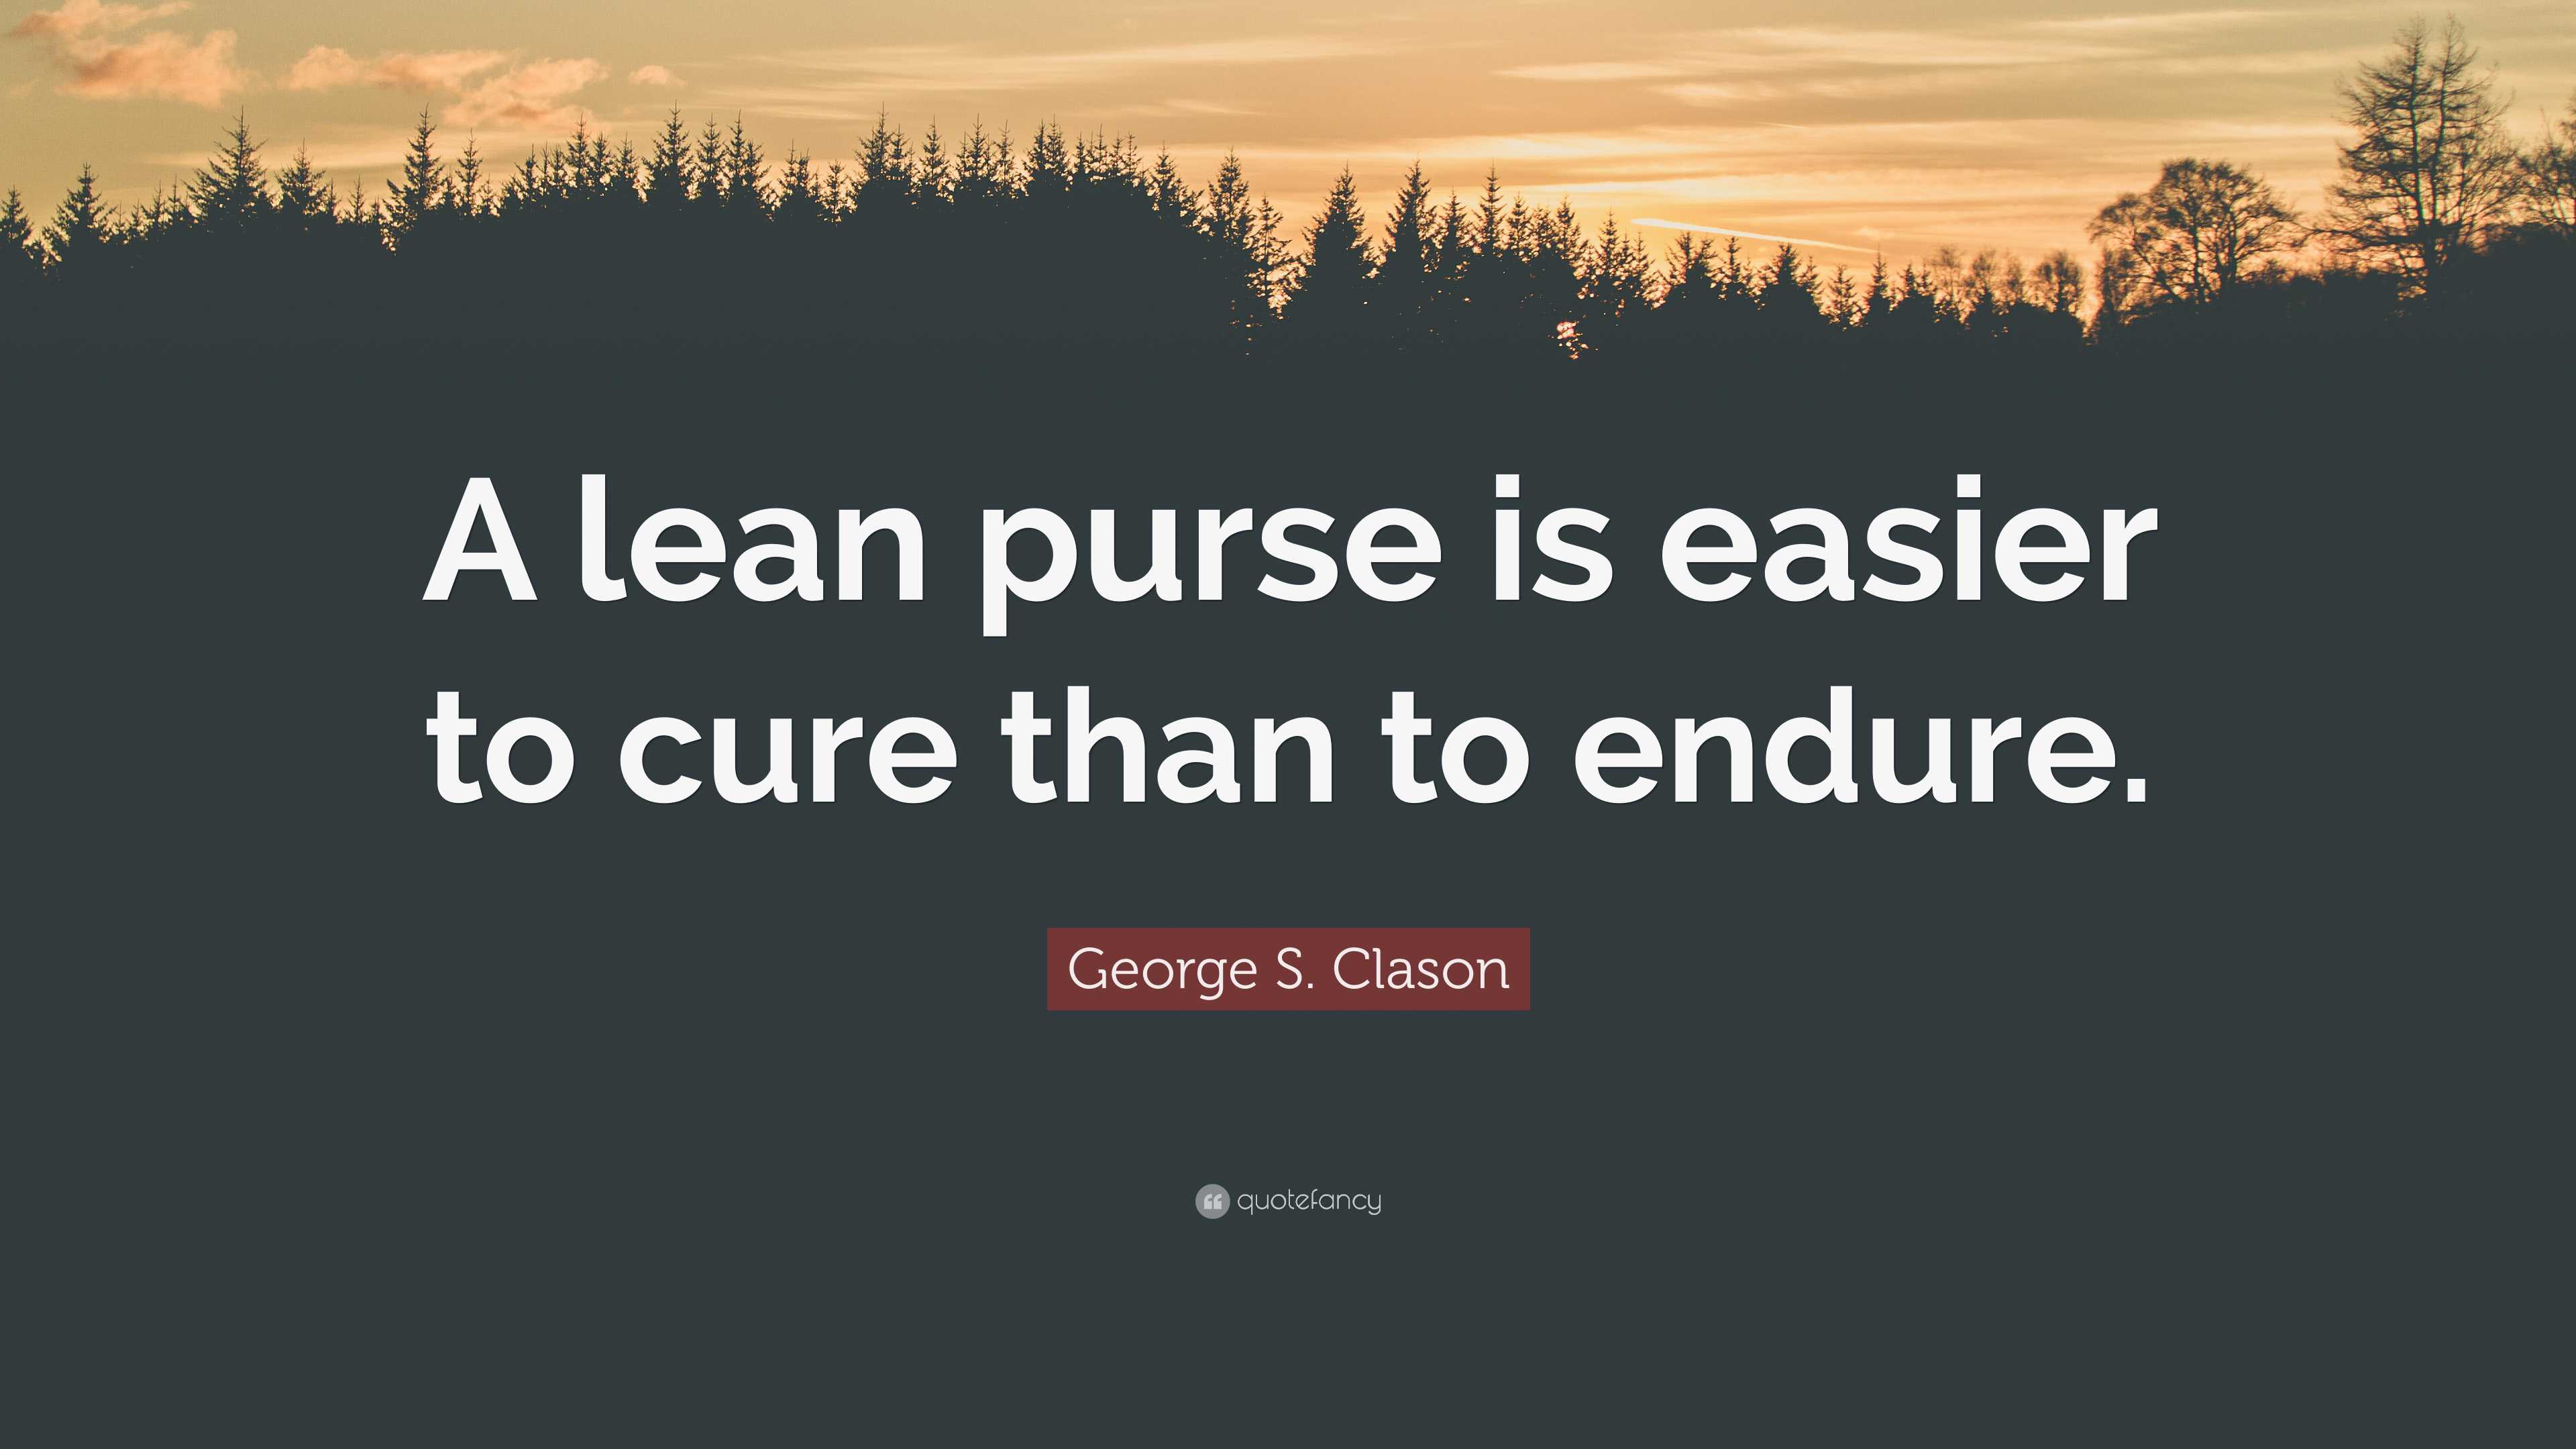 7935320 George S Clason Quote A lean purse is easier to cure than to